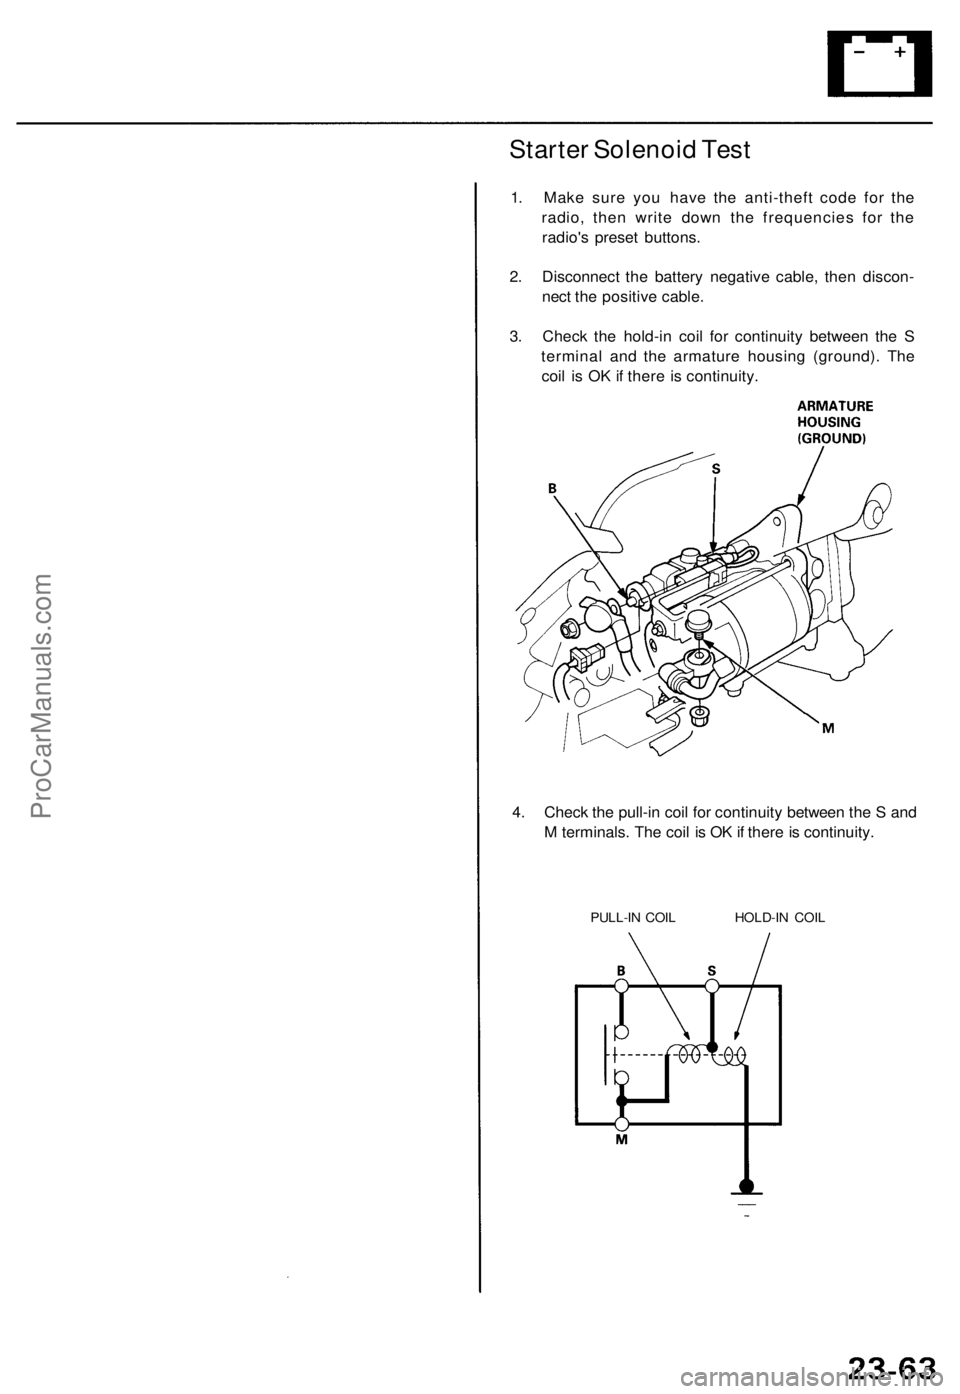 ACURA TL 1995  Service Repair Manual 
Starter Solenoid Test

1. Make sure you have the anti-theft code for the

radio, then write down the frequencies for the

radio's preset buttons.

2. Disconnect the battery negative cable, then d